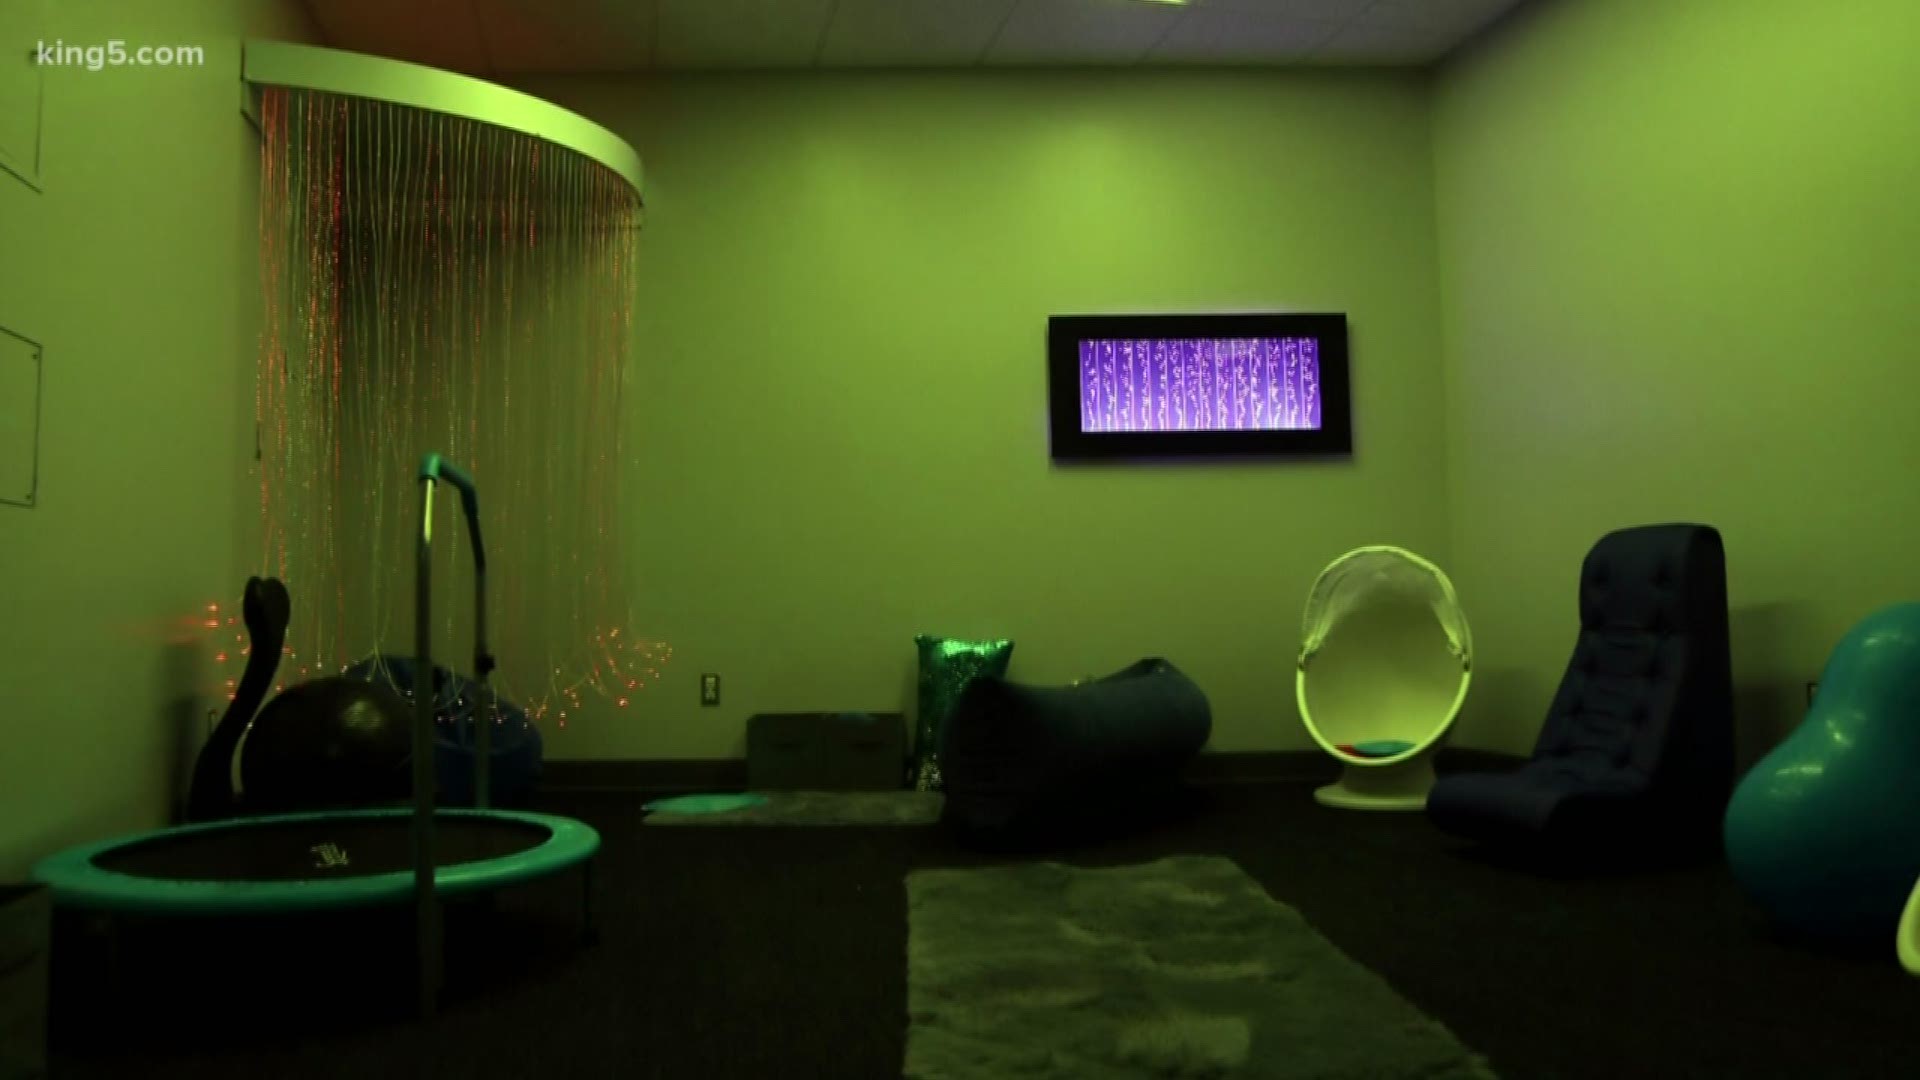 A sensory room is being offered at CenturyLink Field this season so fans with sensory challenges can enjoy watching the Seattle Seahawks.